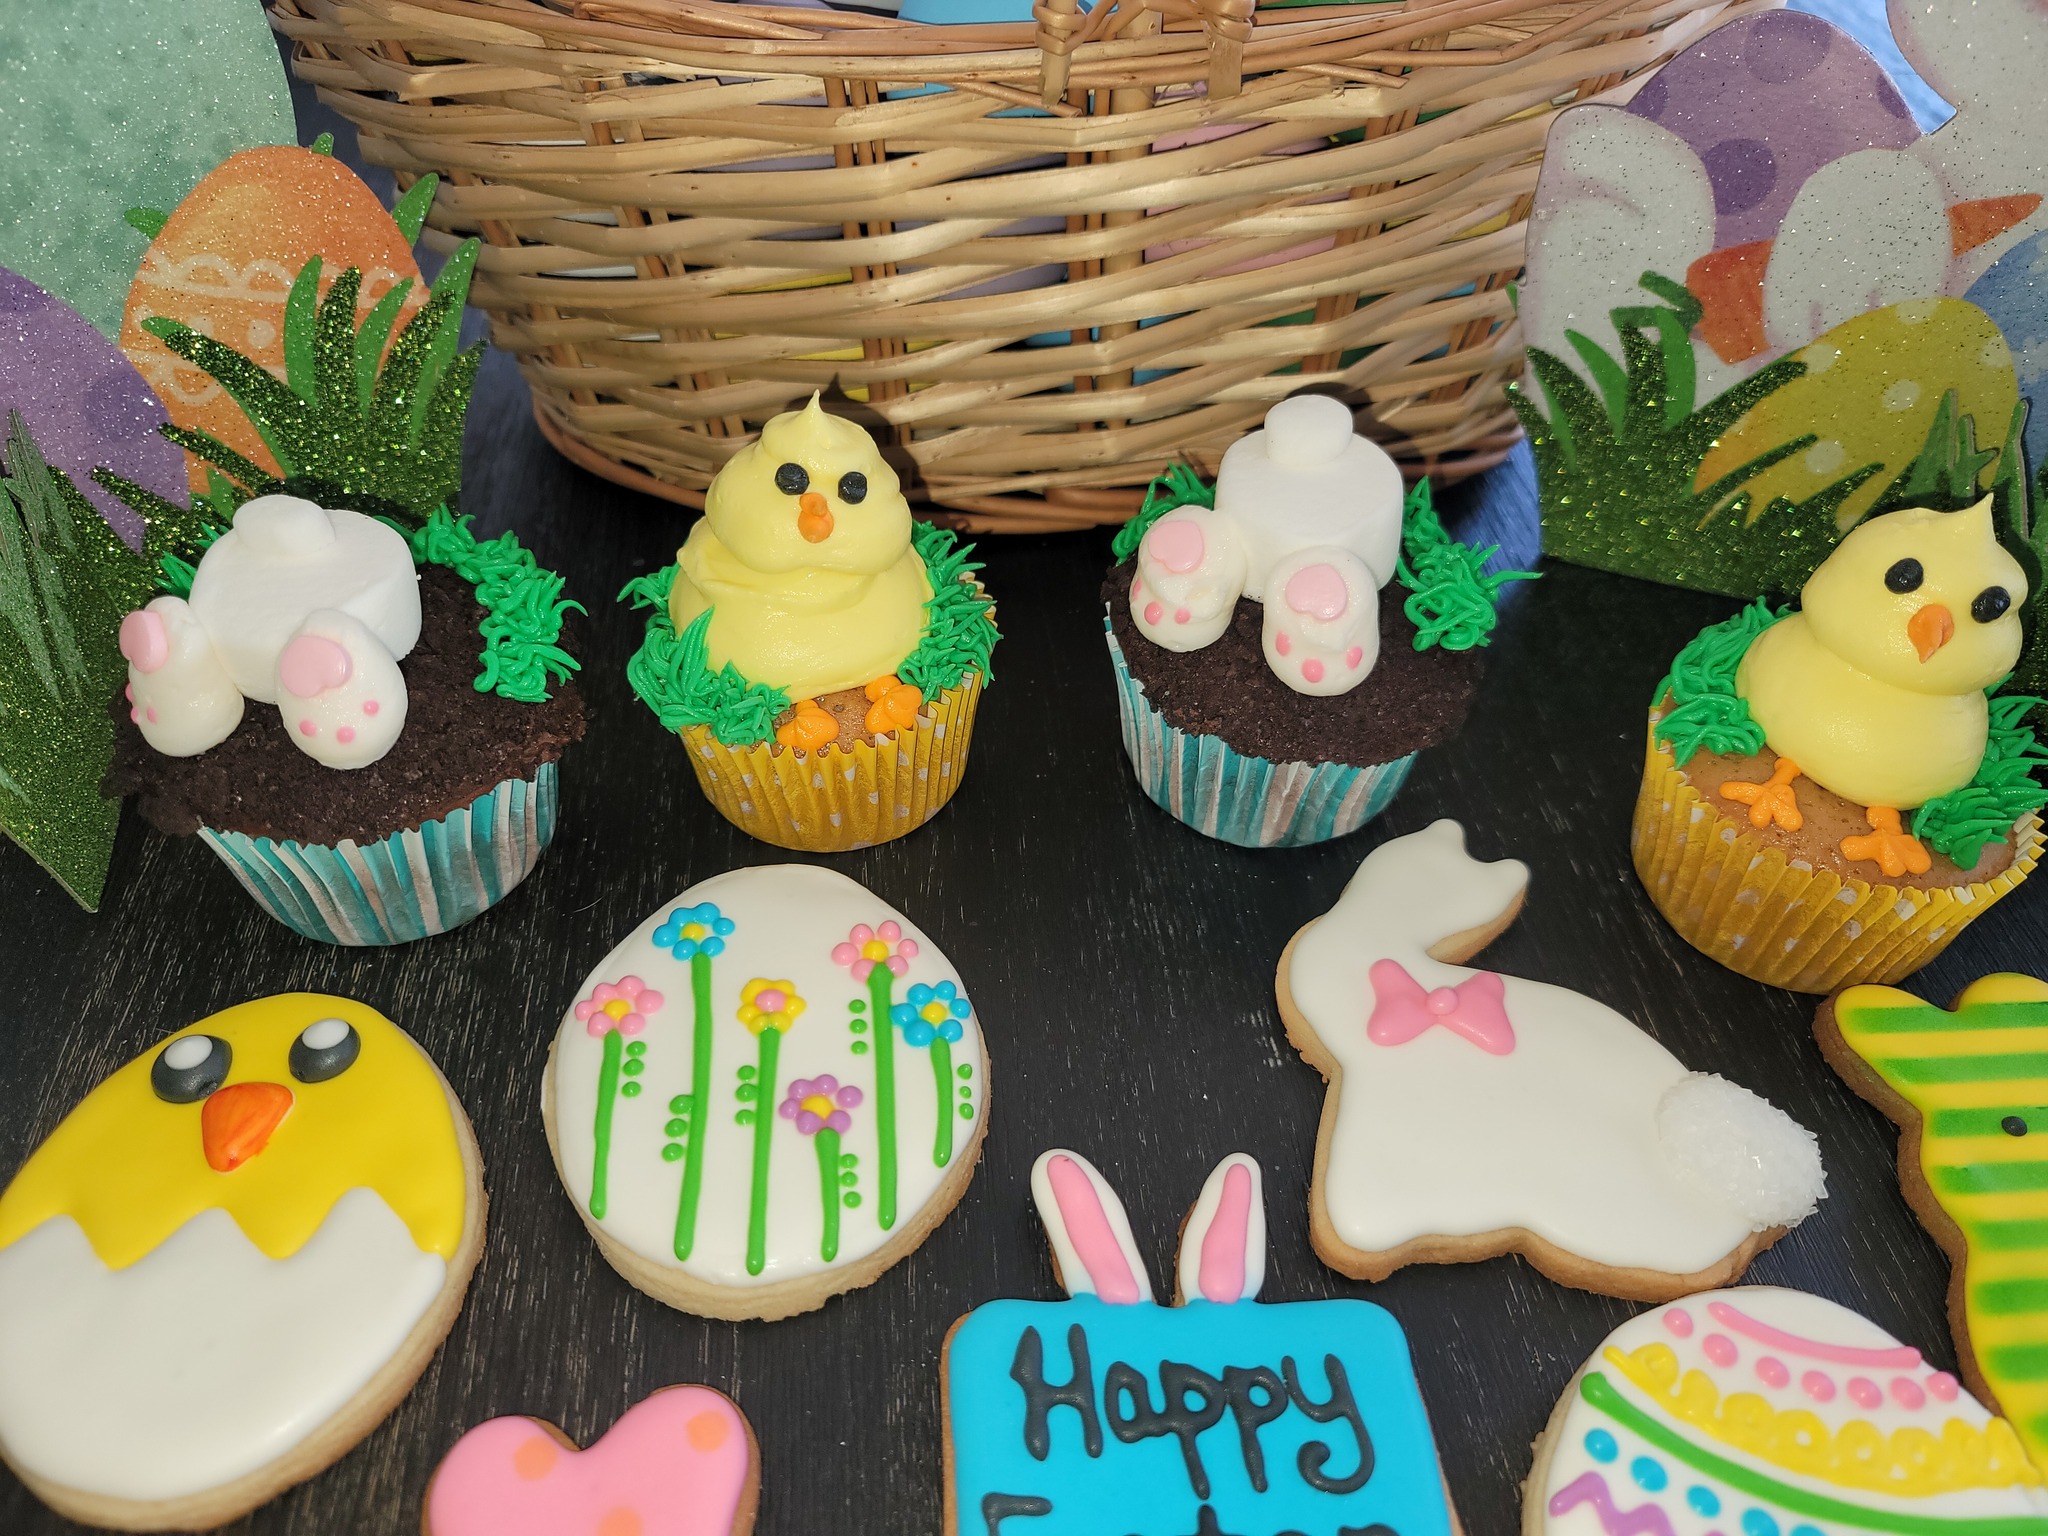 A basket of easter cookies decorated with bunnies and chicks.